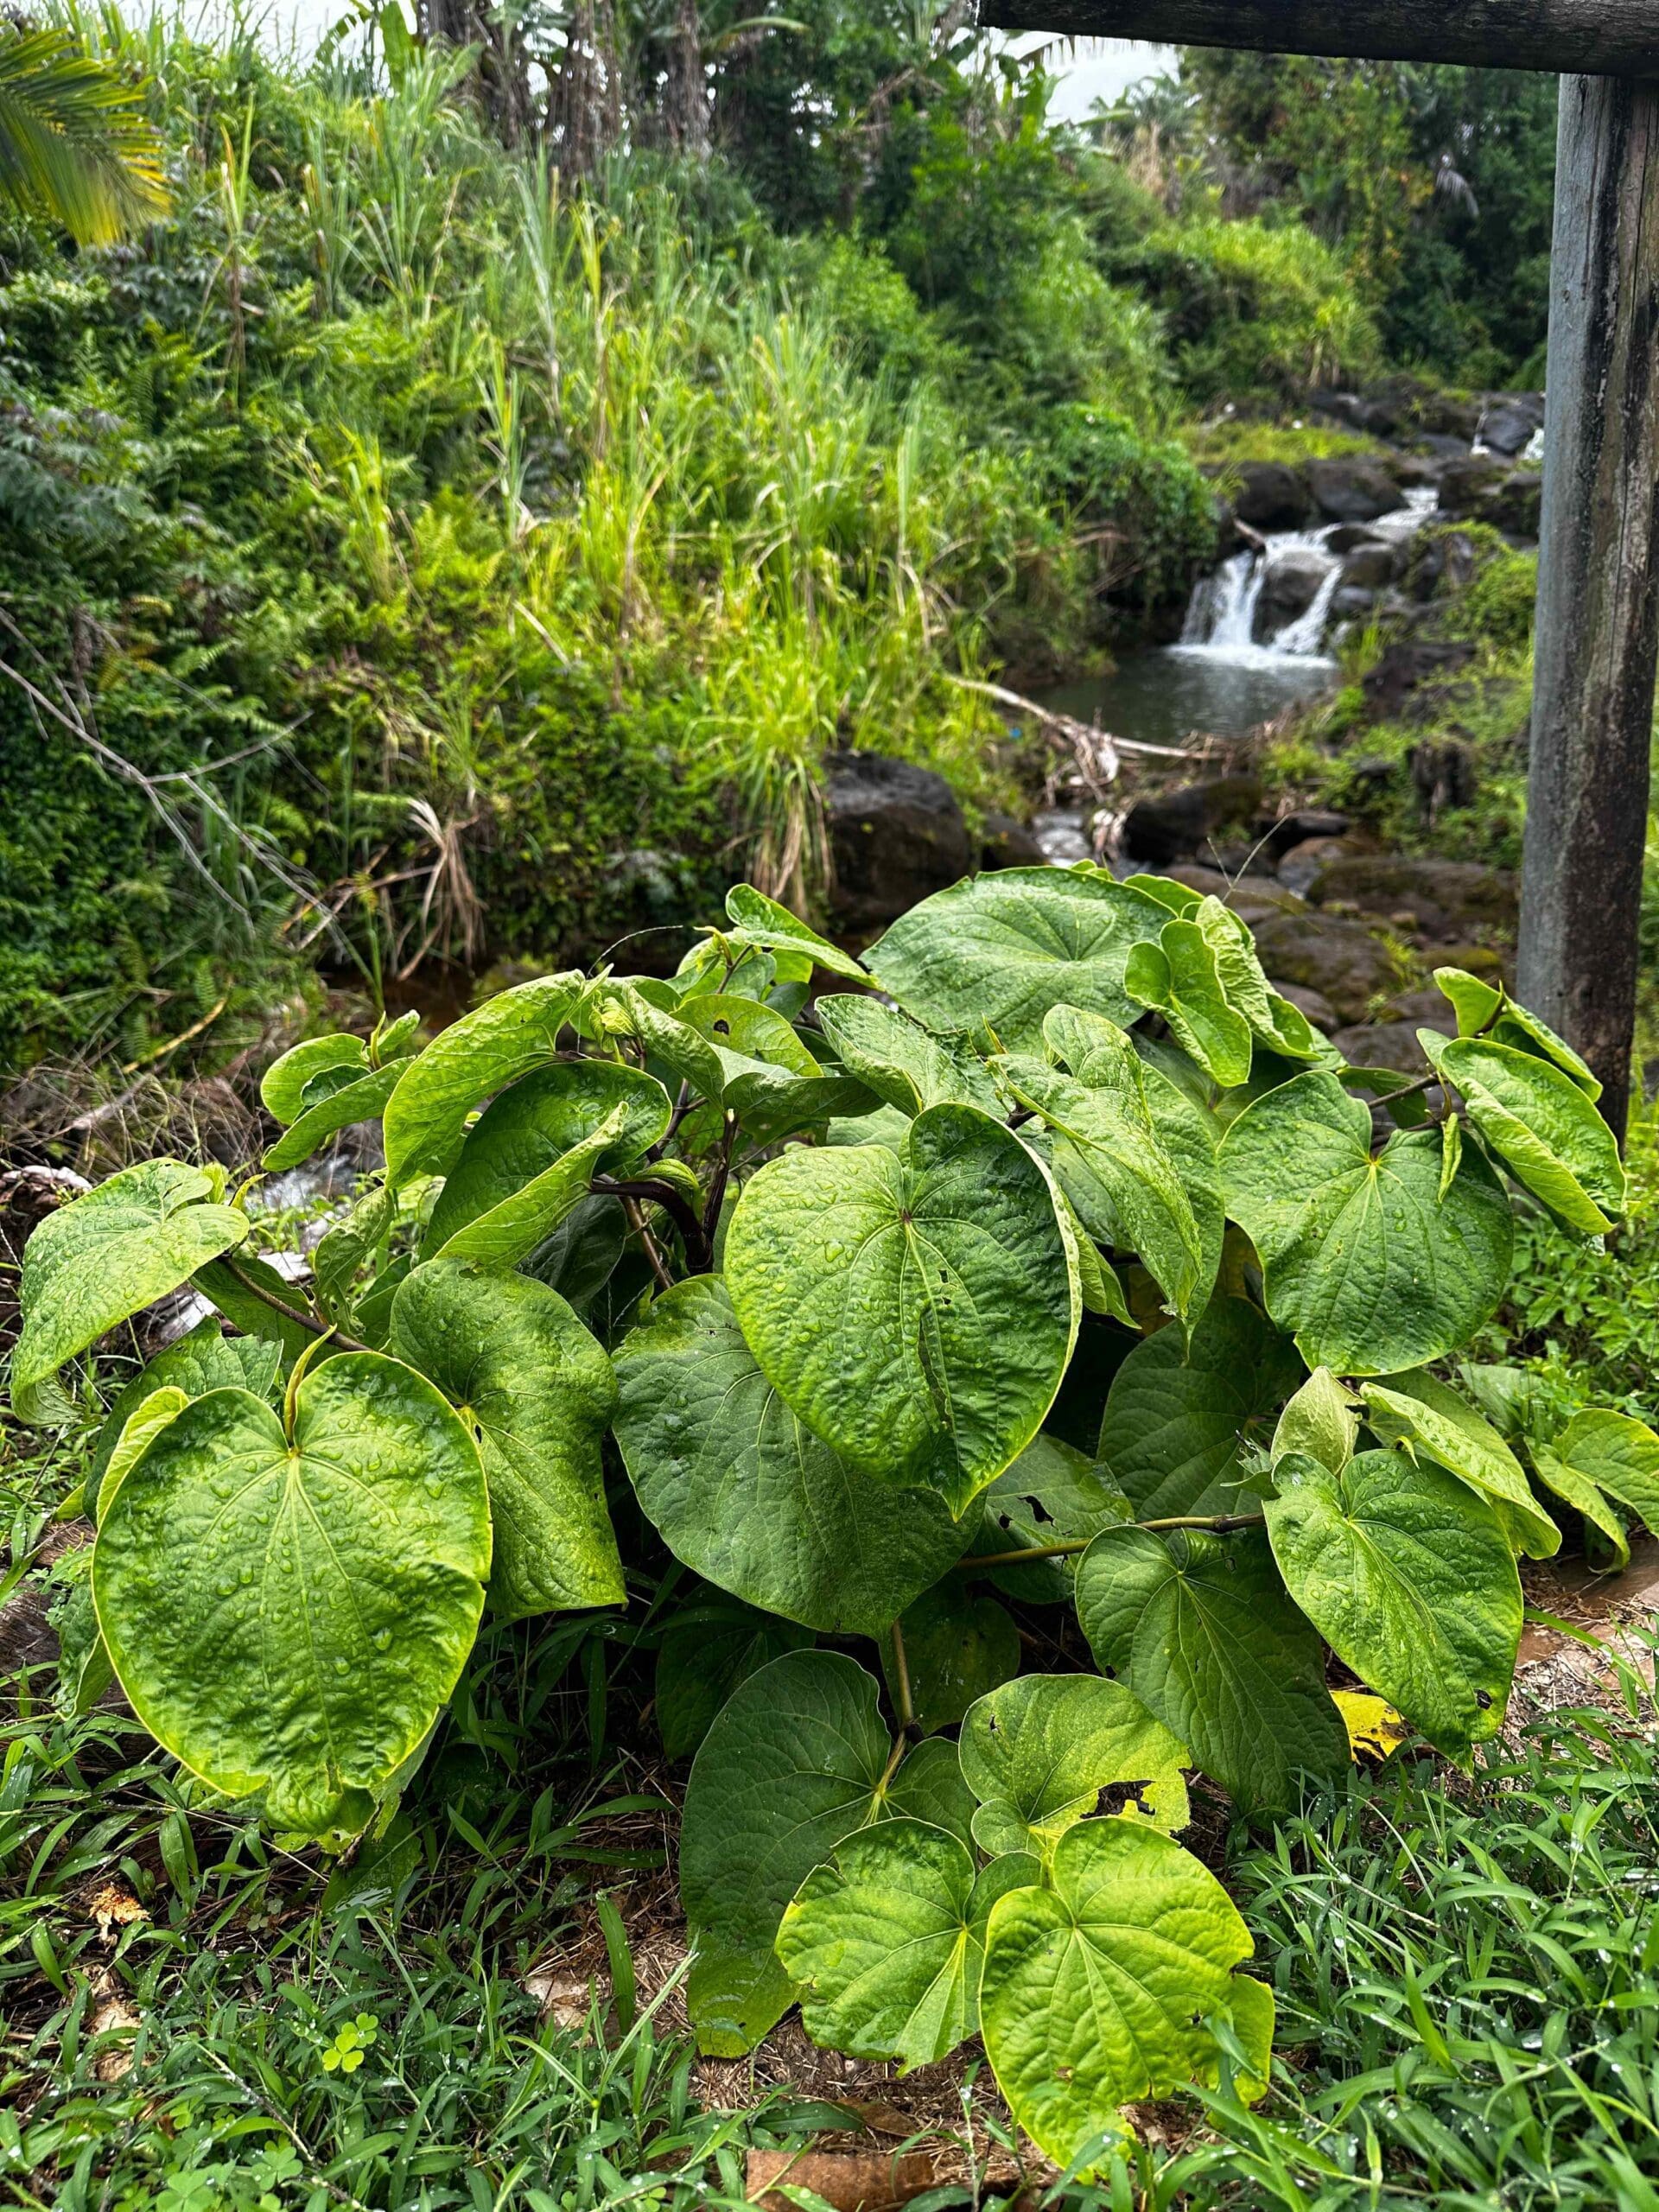 A Photograph taken in the sunny daylight of fresh Hawaiian ahvah ('awa) or kava, with the backdrop of a waterfall.